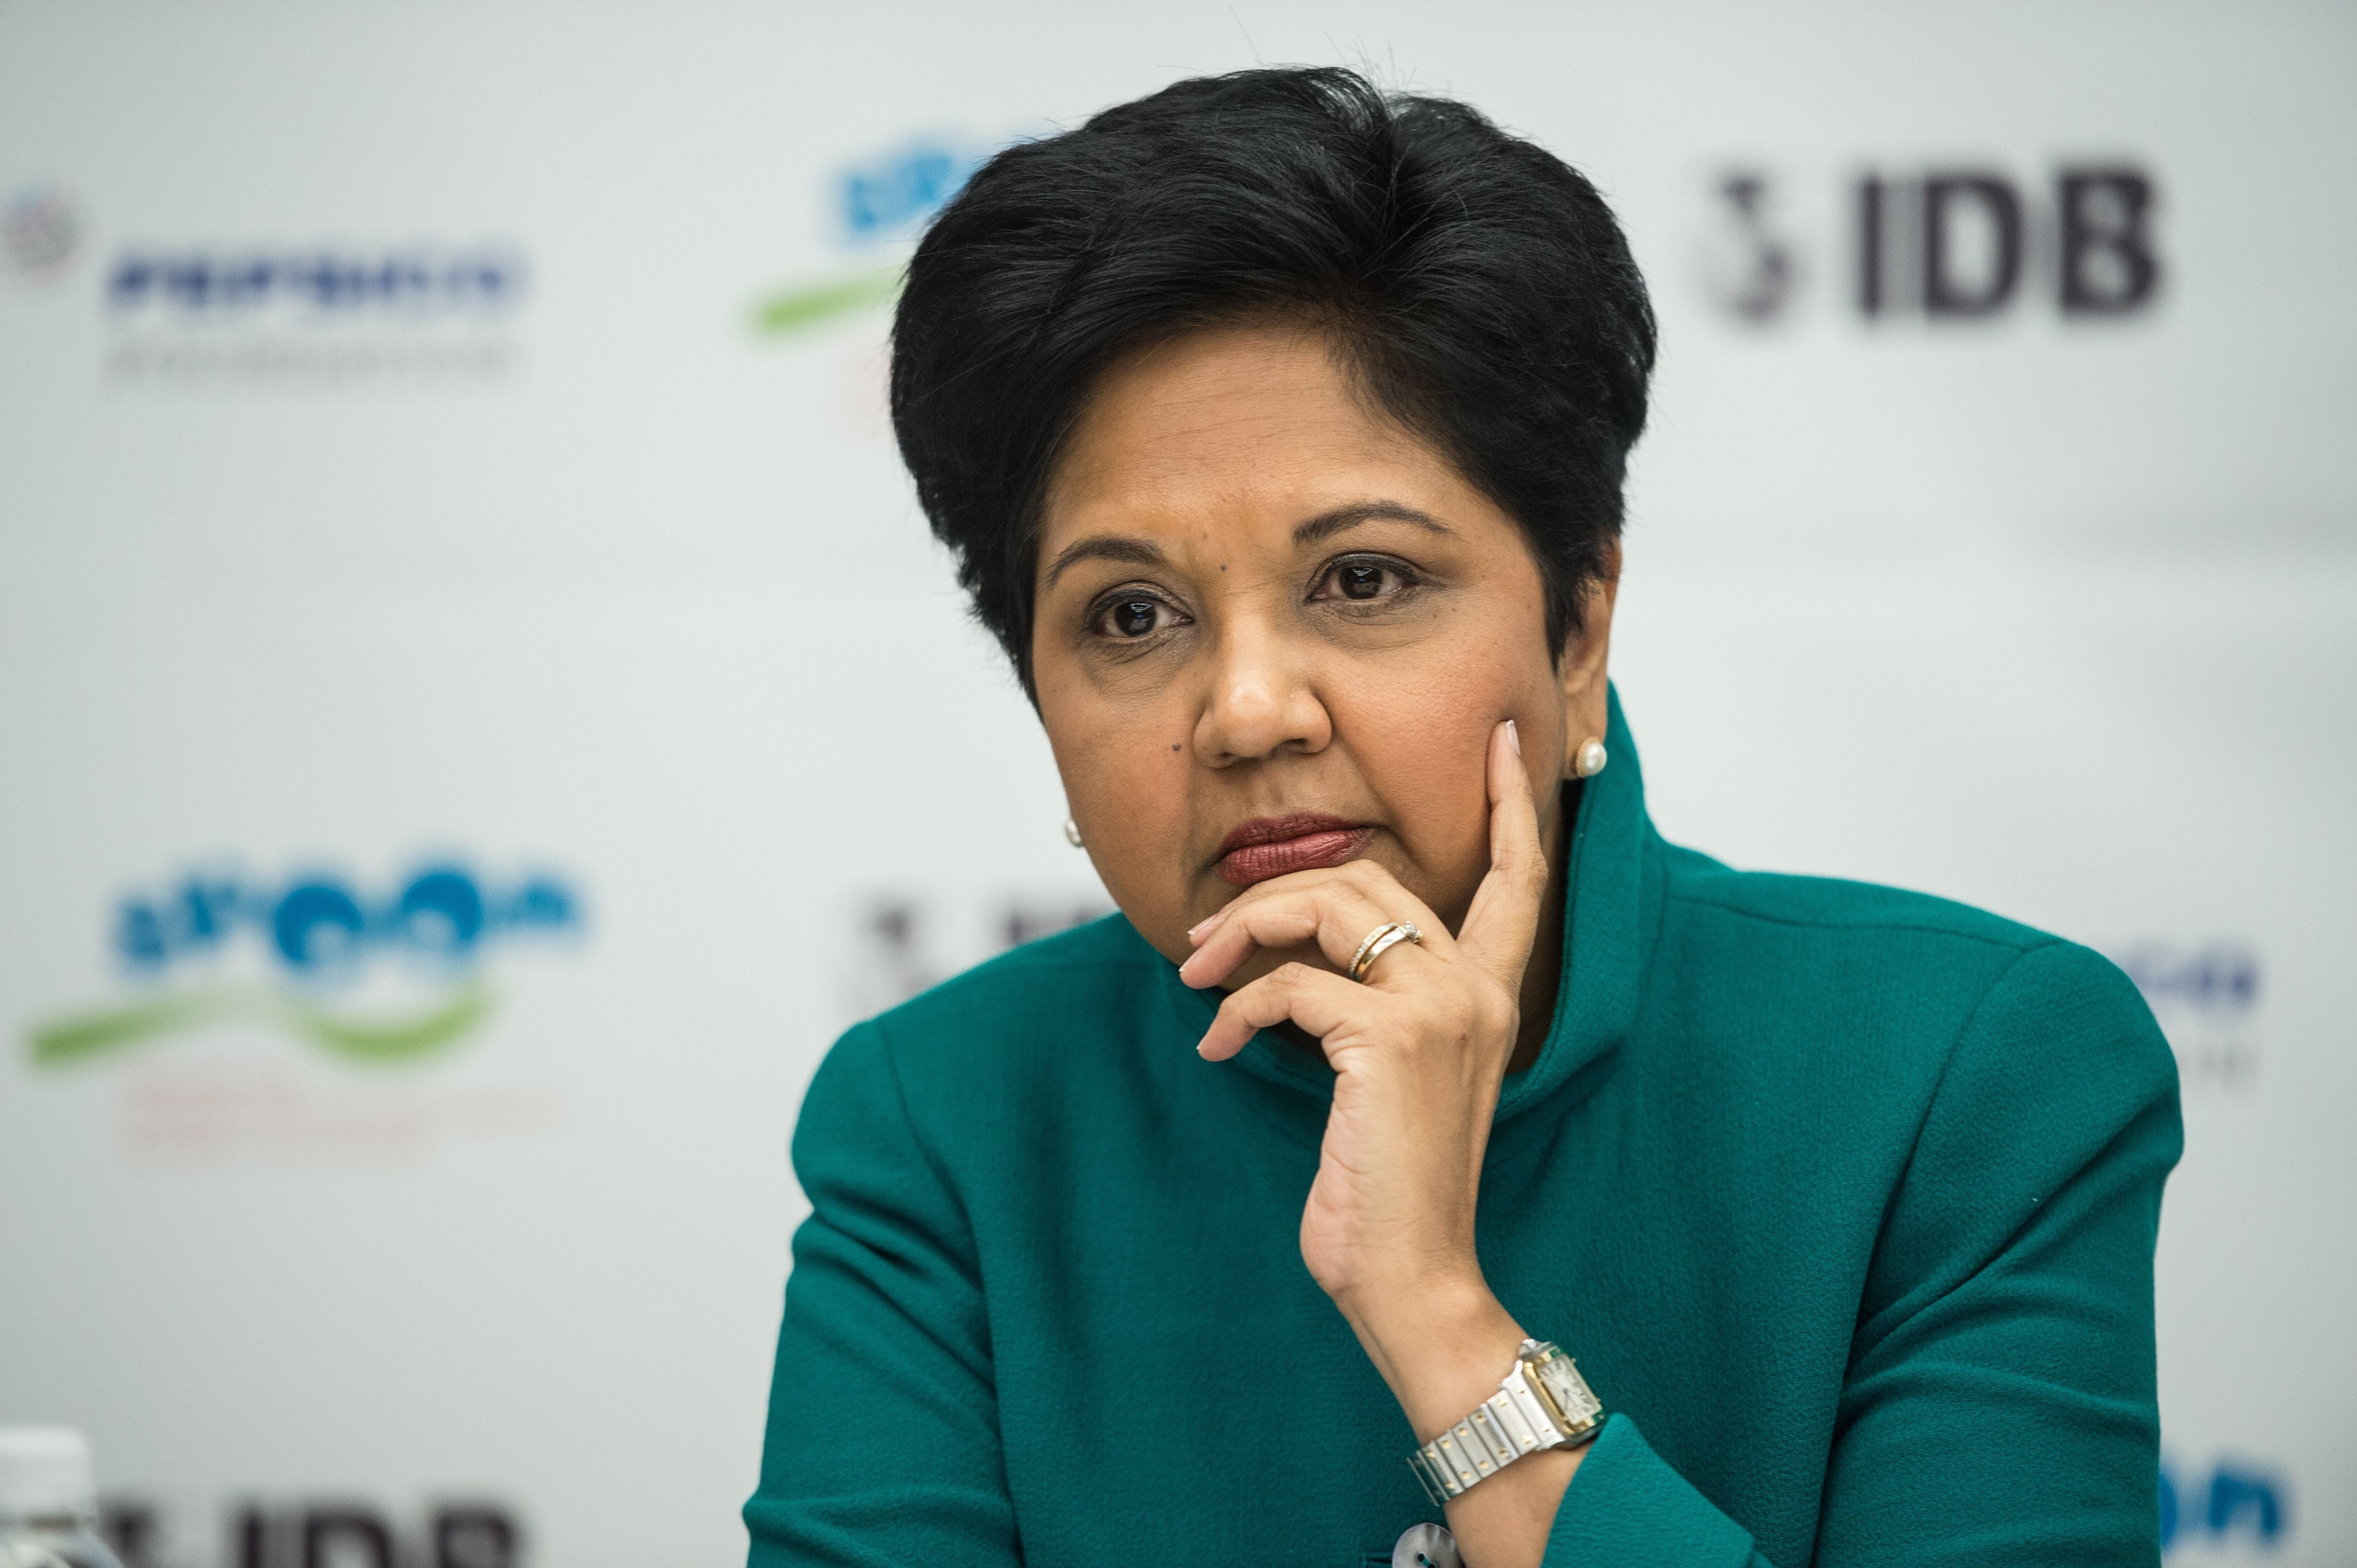 Pepsico CEO Indra Nooyi during the announcement of a partnership in Washington, D.C. on Oct. 15, 2014. (NICHOLAS KAMM—AFP/Getty Images)